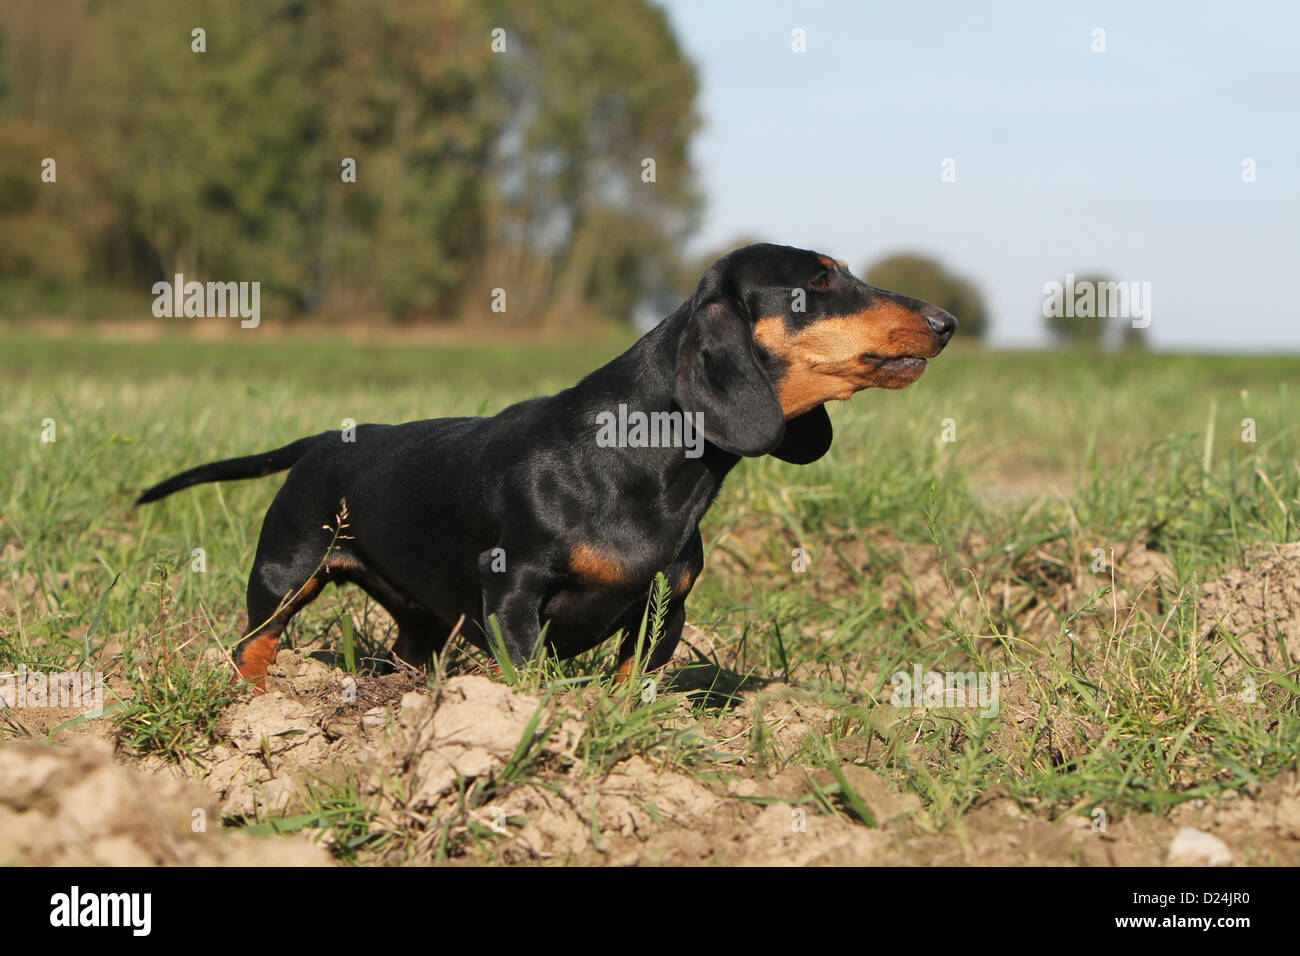 Dog Dachshund /  Dackel / Teckel  shorthaired adult (black and tan) standing in a meadow Stock Photo